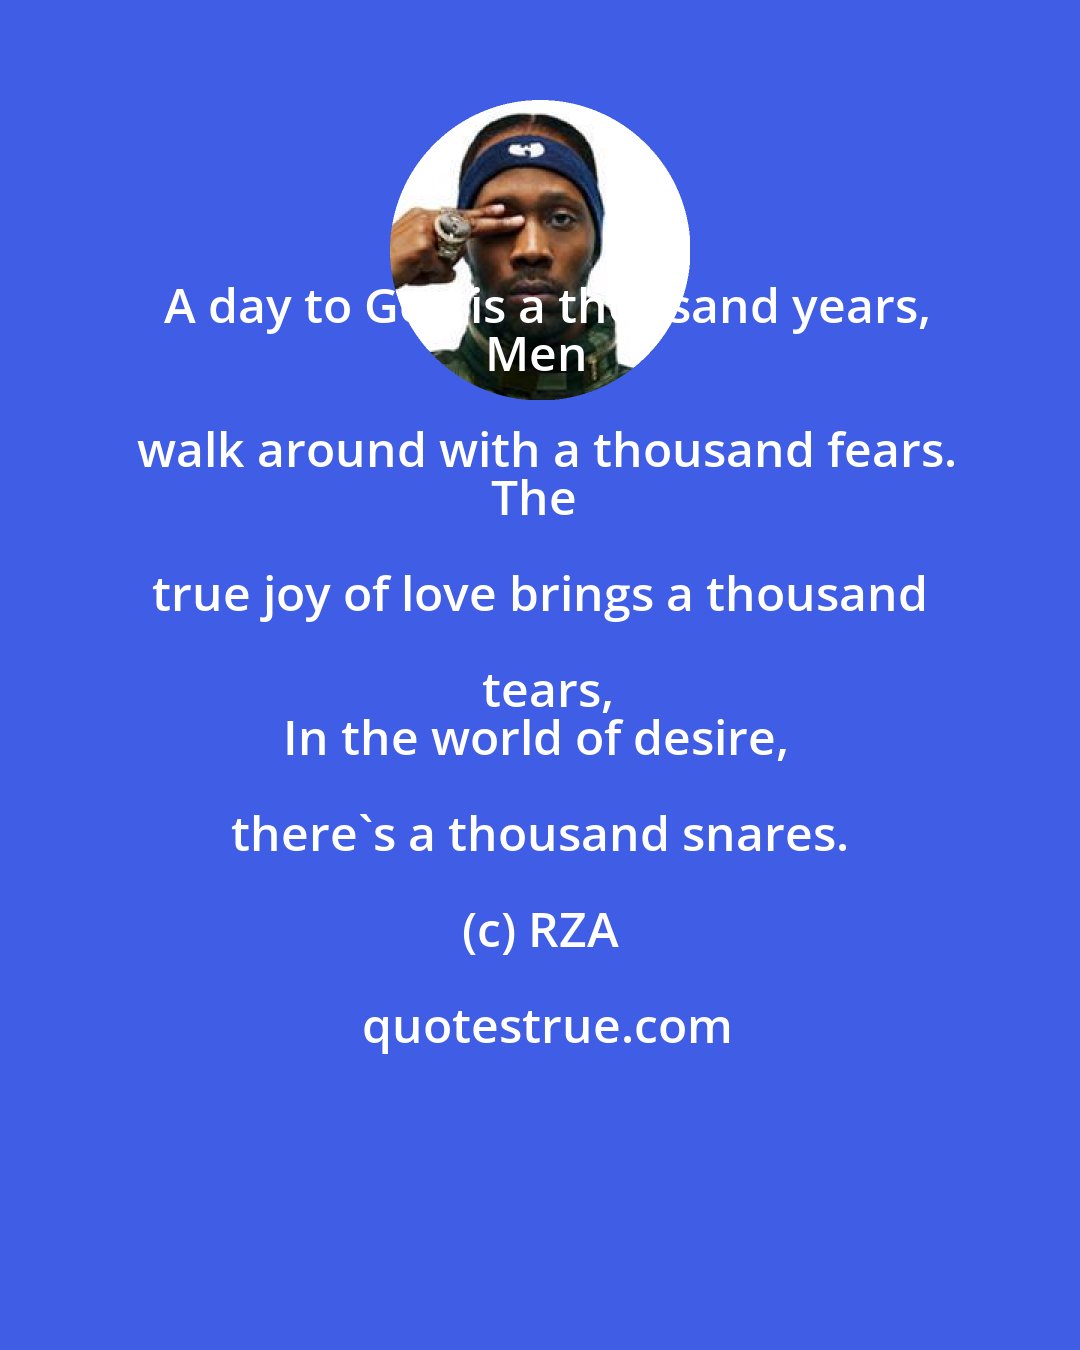 RZA: A day to God is a thousand years,
Men walk around with a thousand fears.
The true joy of love brings a thousand tears,
In the world of desire, there's a thousand snares.